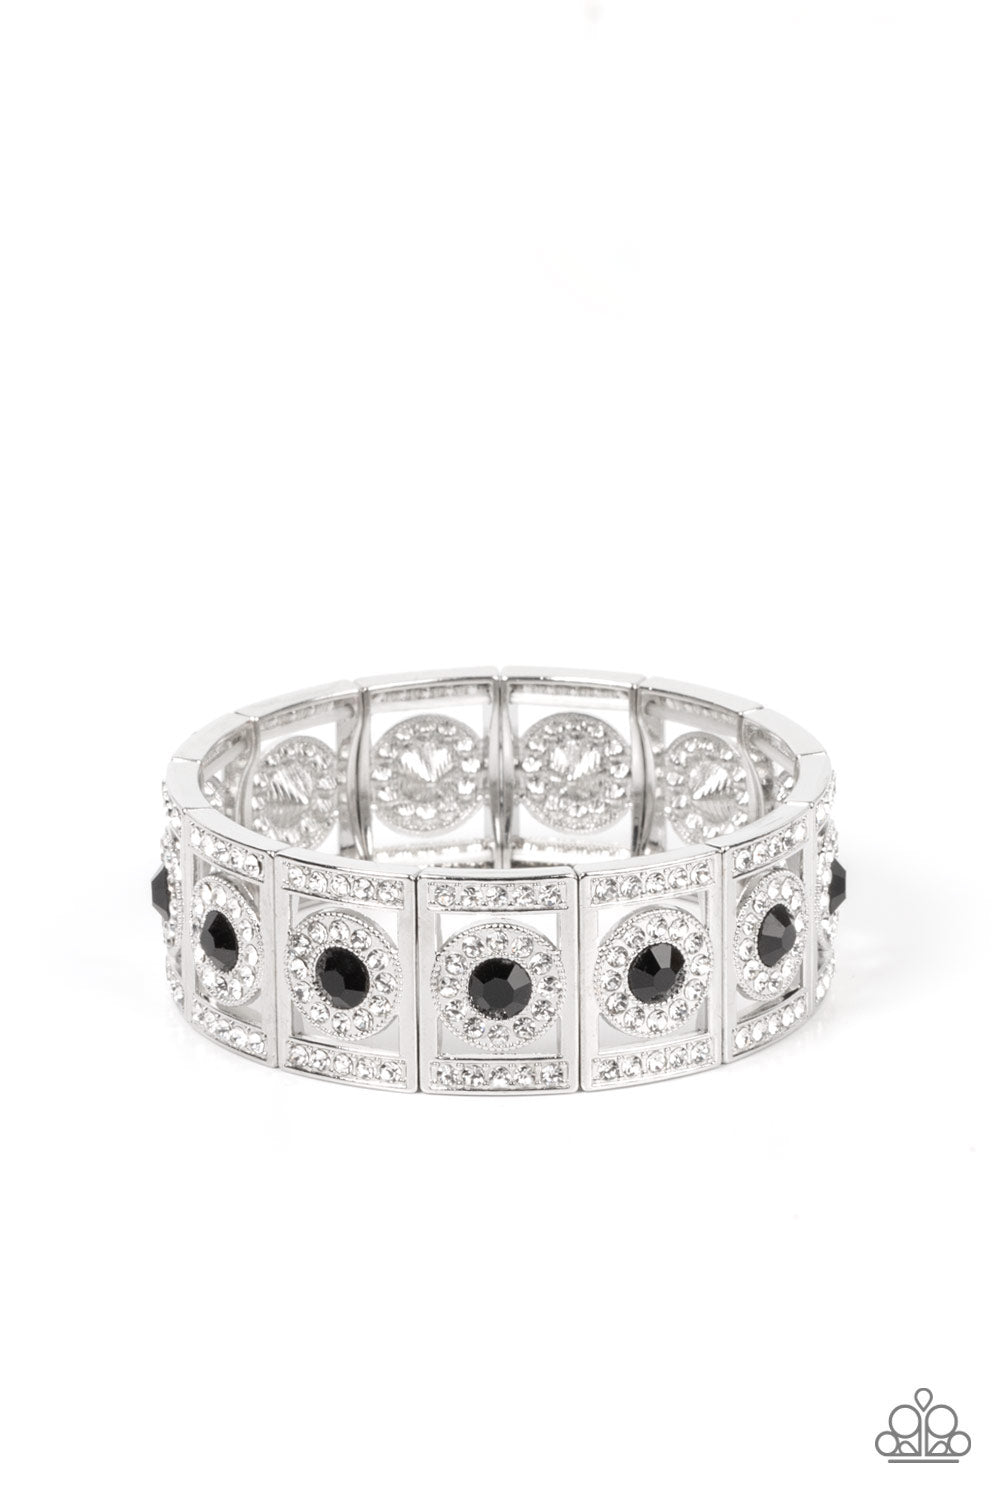 Ultra Upscale - Black and Silver Bracelet - Paparazzi Accessories - A glassy black rhinestone is pressed into a ring of glitzy white rhinestones inside a rectangular silver frame dusted in dazzling white rhinestones. The timeless frames sparkle along stretchy bands around the wrist.